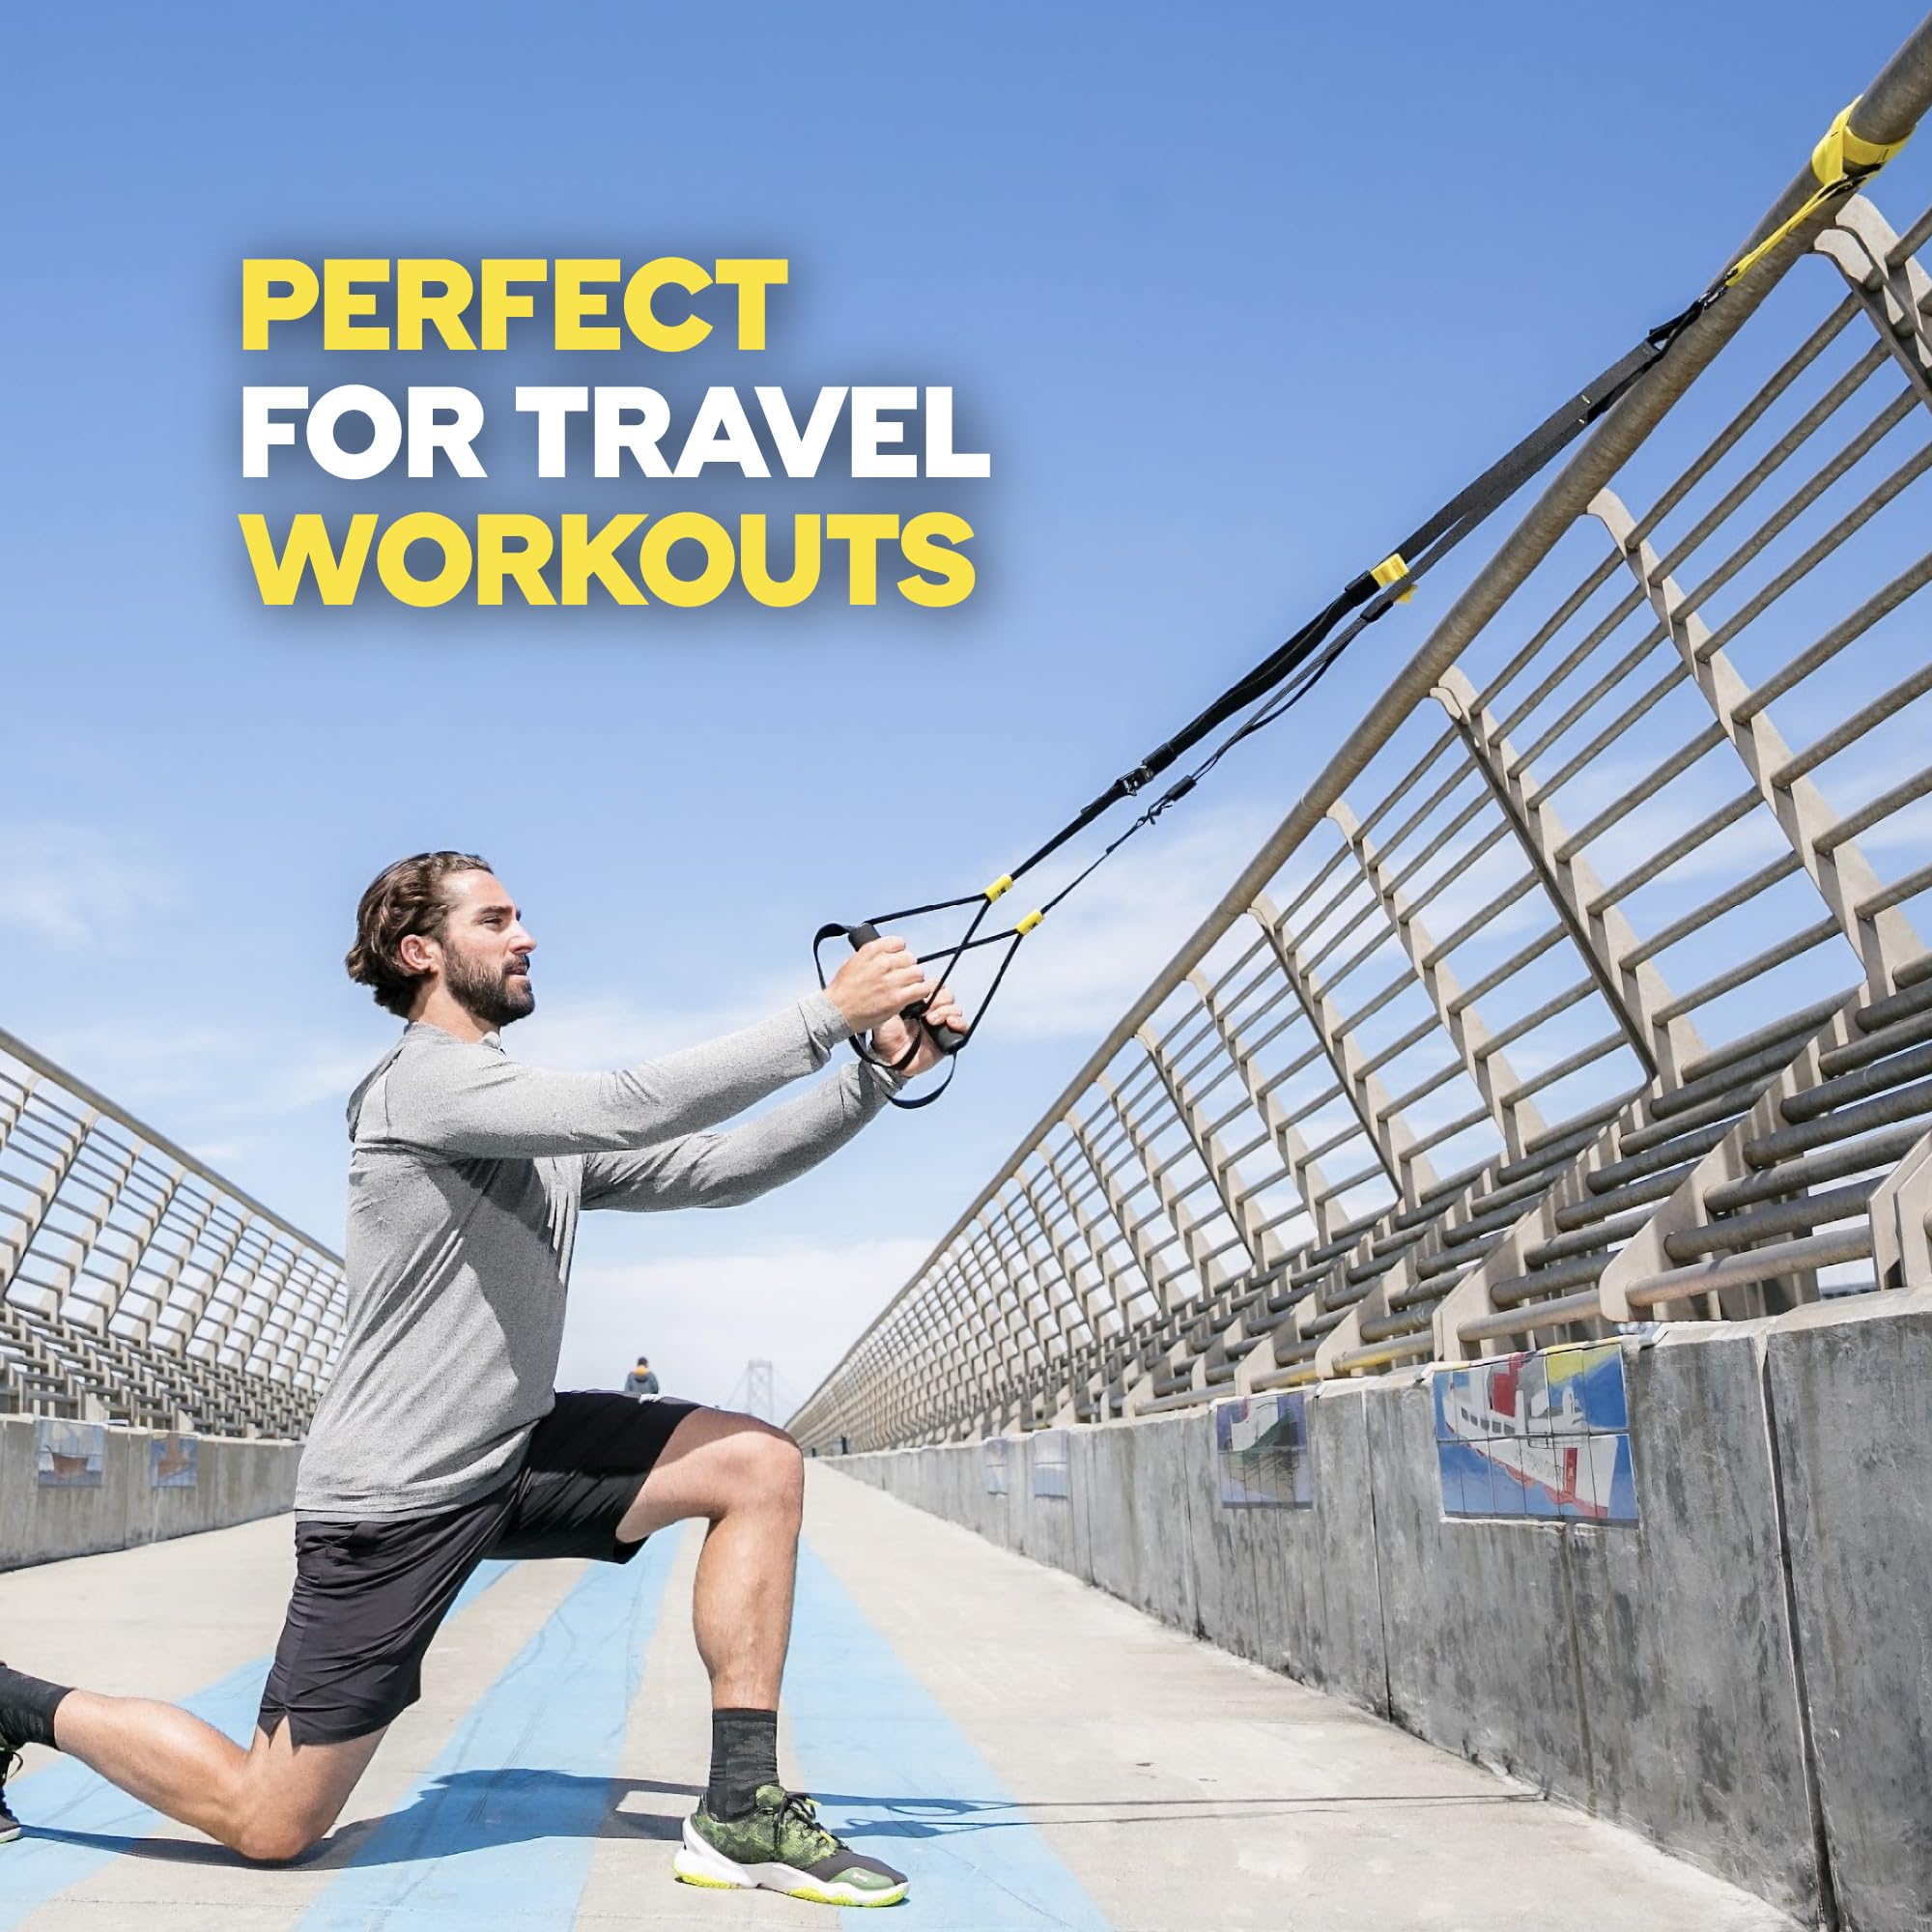 TRX GO Suspension Trainer System, Full-Body Workout for All Levels & Goals, Lightweight & Portable, Fast, Fun & Effective Workouts, Home Gym Equipment or for Outdoor Workouts, Grey